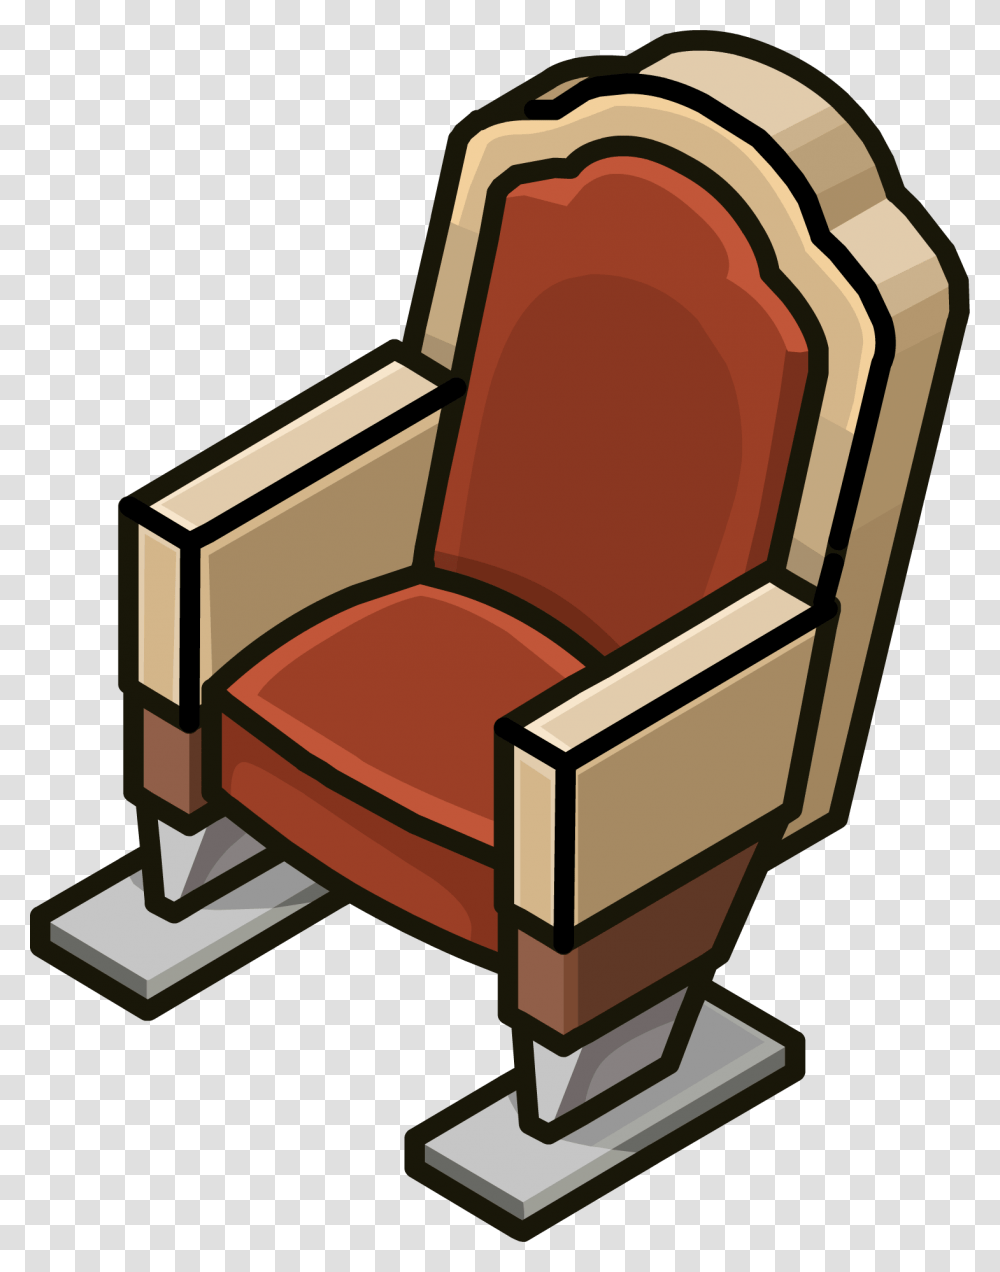 Theater Seat Penguin Wiki Club Penguin Theater Furniture, Chair, Armchair, Throne Transparent Png